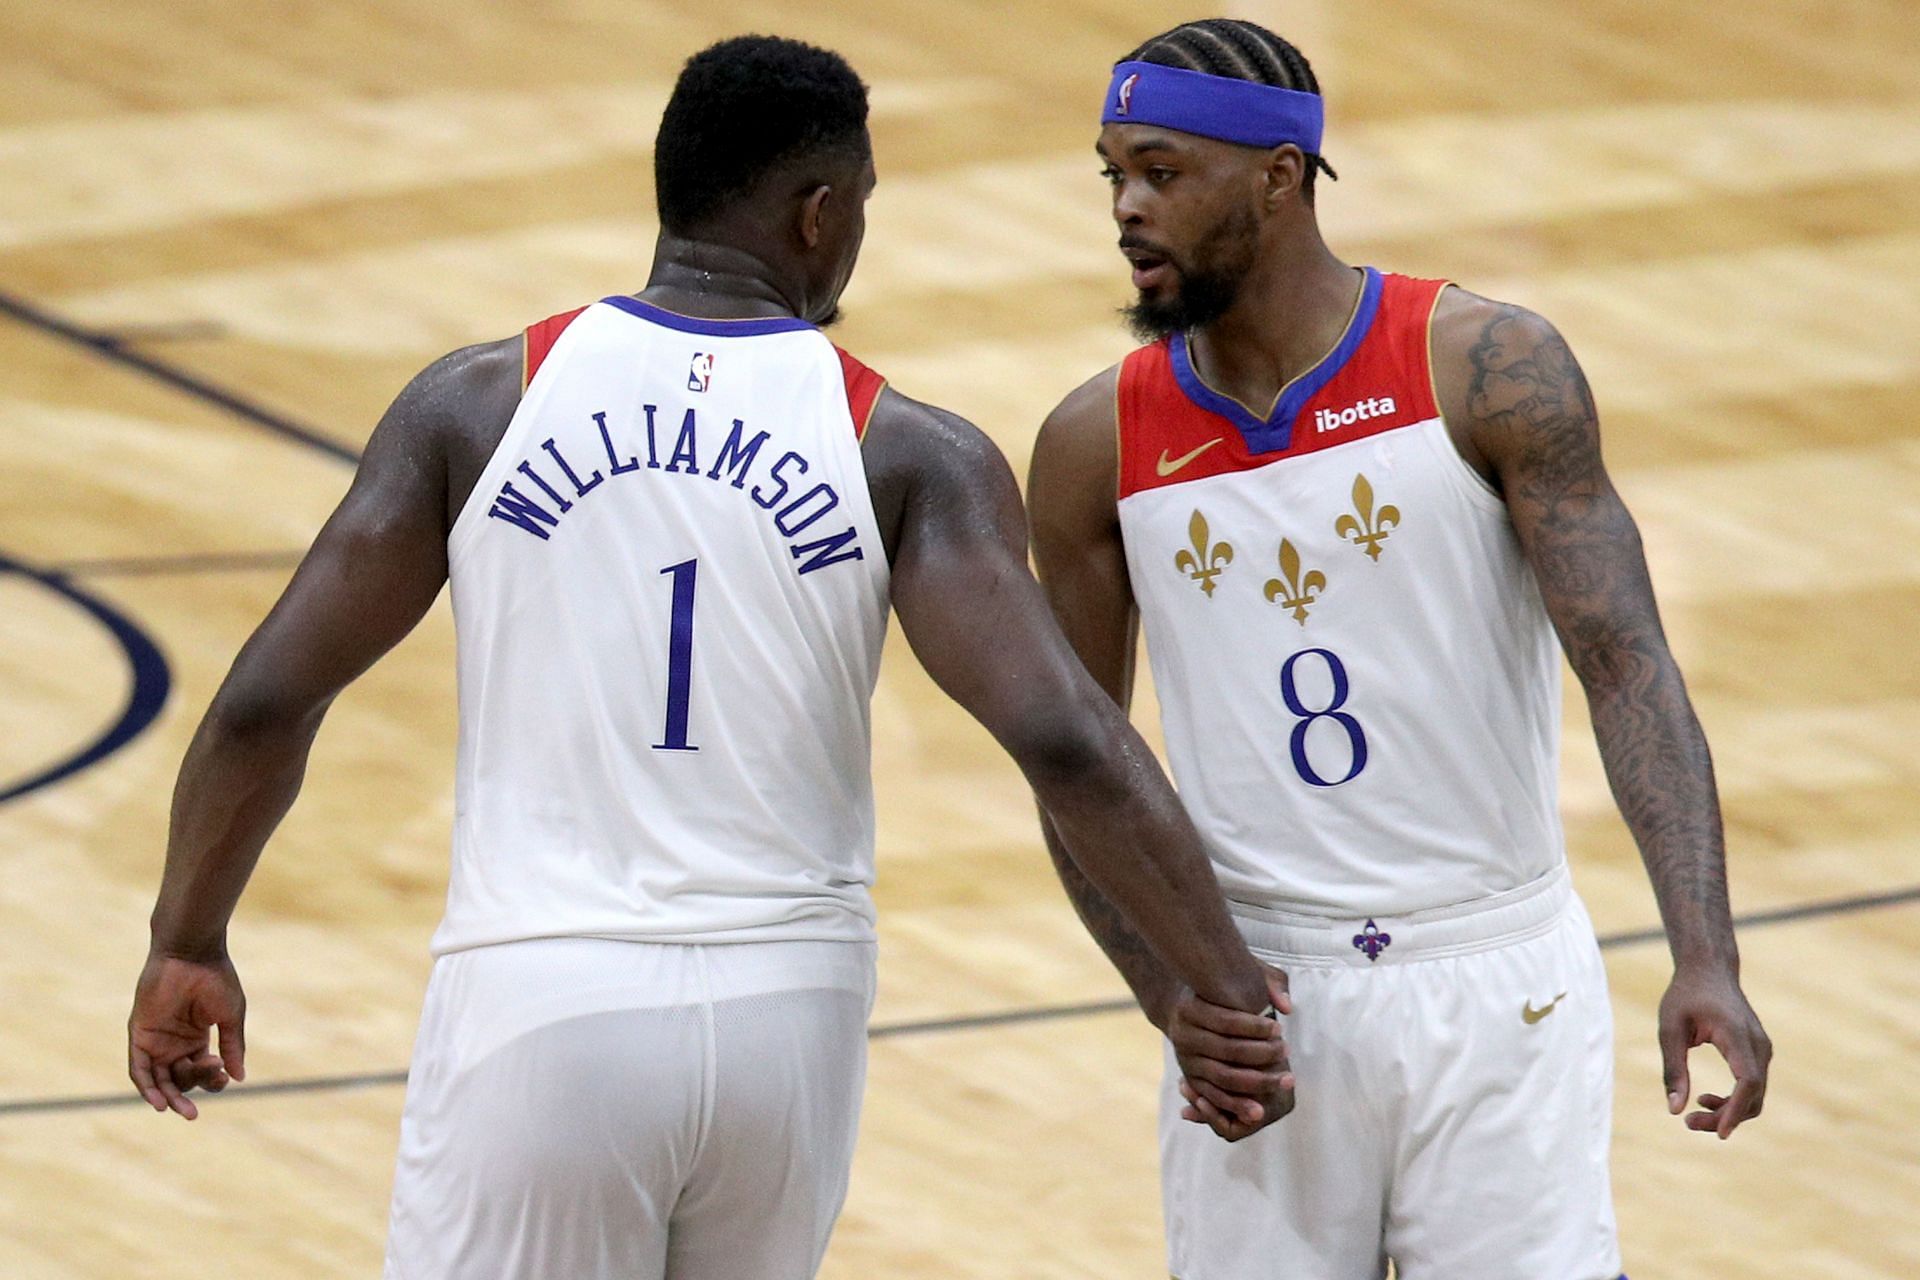 Zion Williamson #1 and Naji Marshall #8 of the New Orleans Pelicans